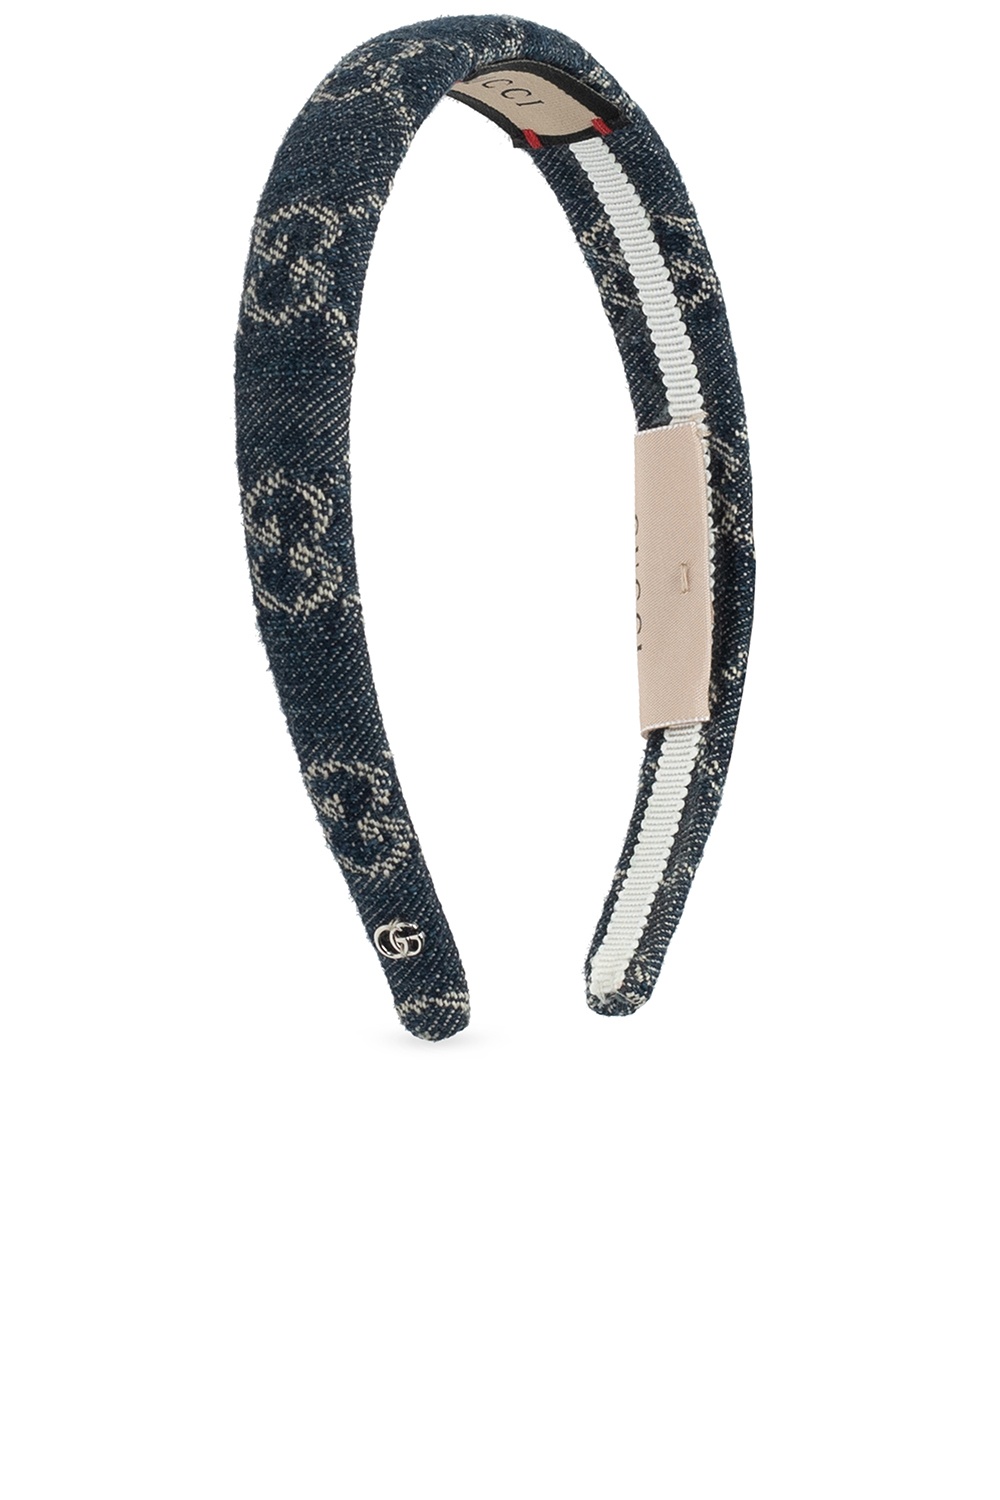 Navy blue hair band from . Crafted from 